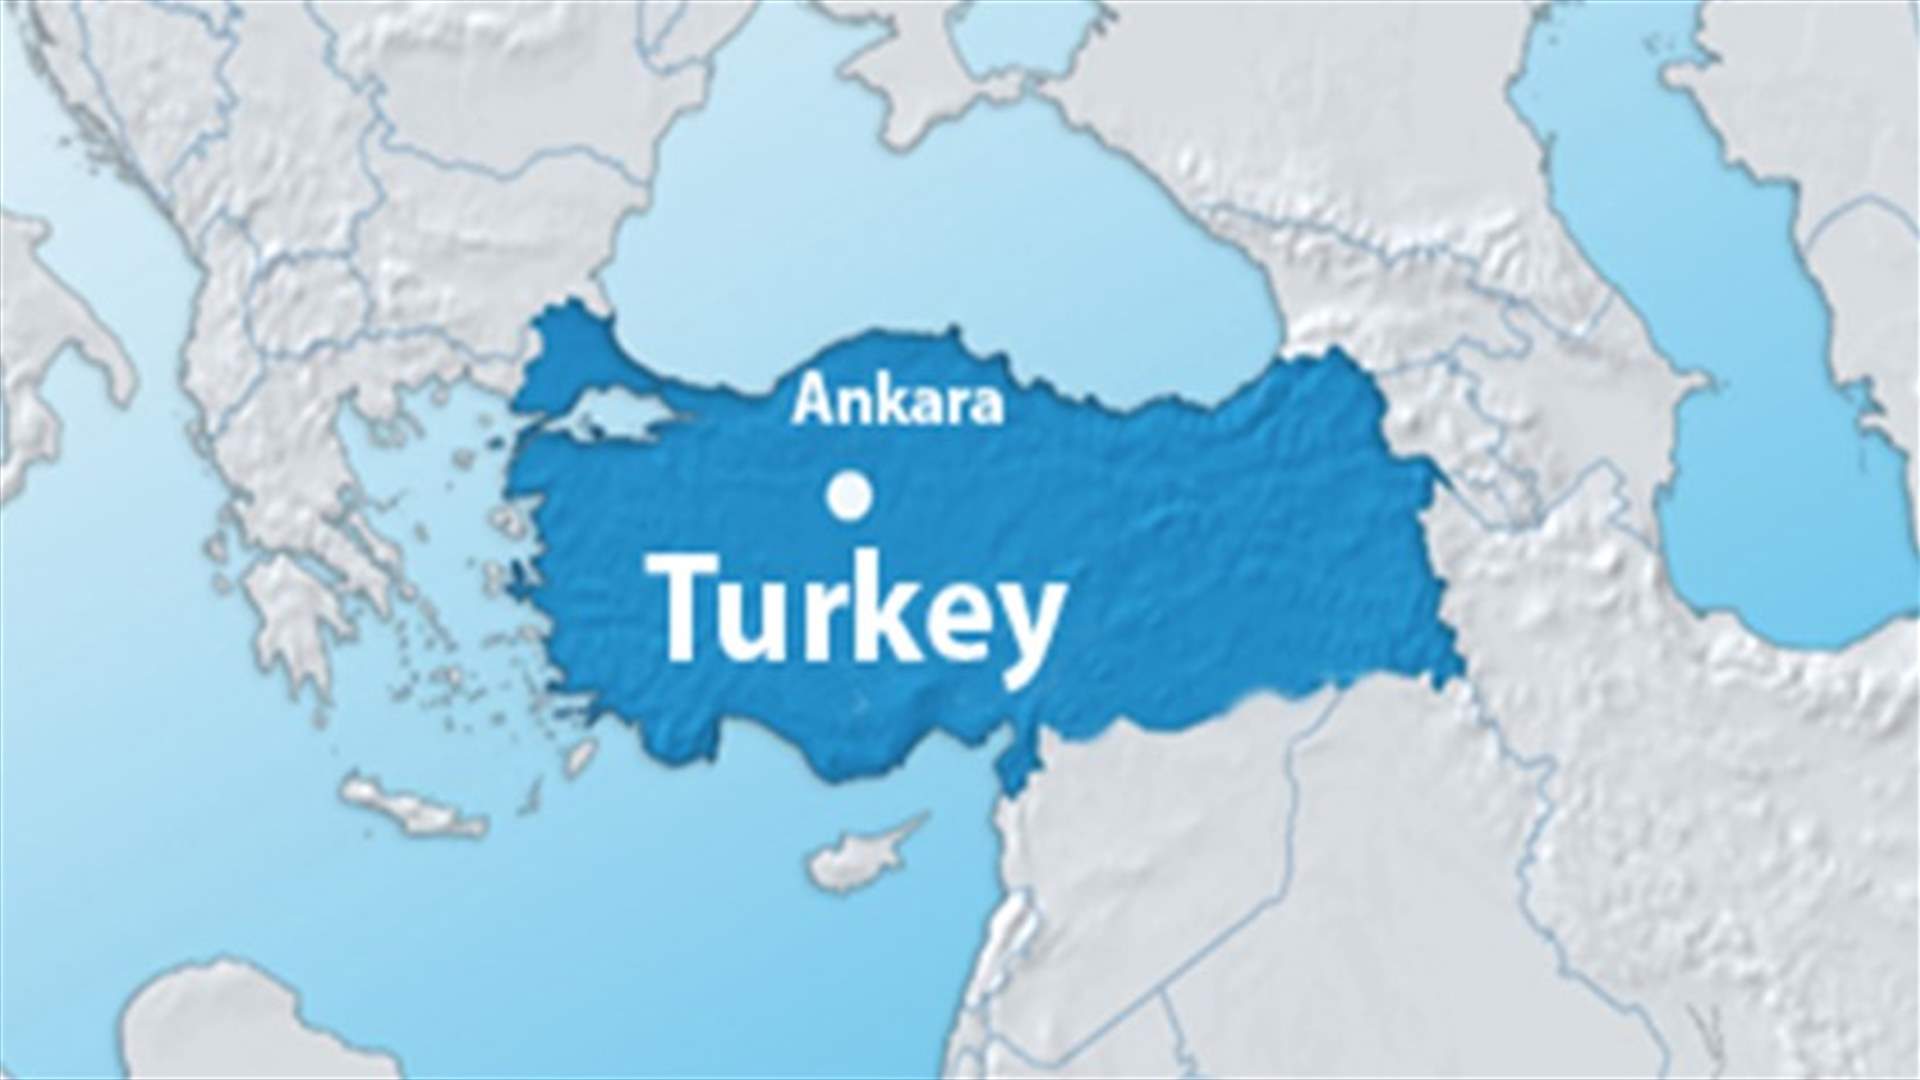 Turkey returns fire into Syria after rockets land in border town - security official